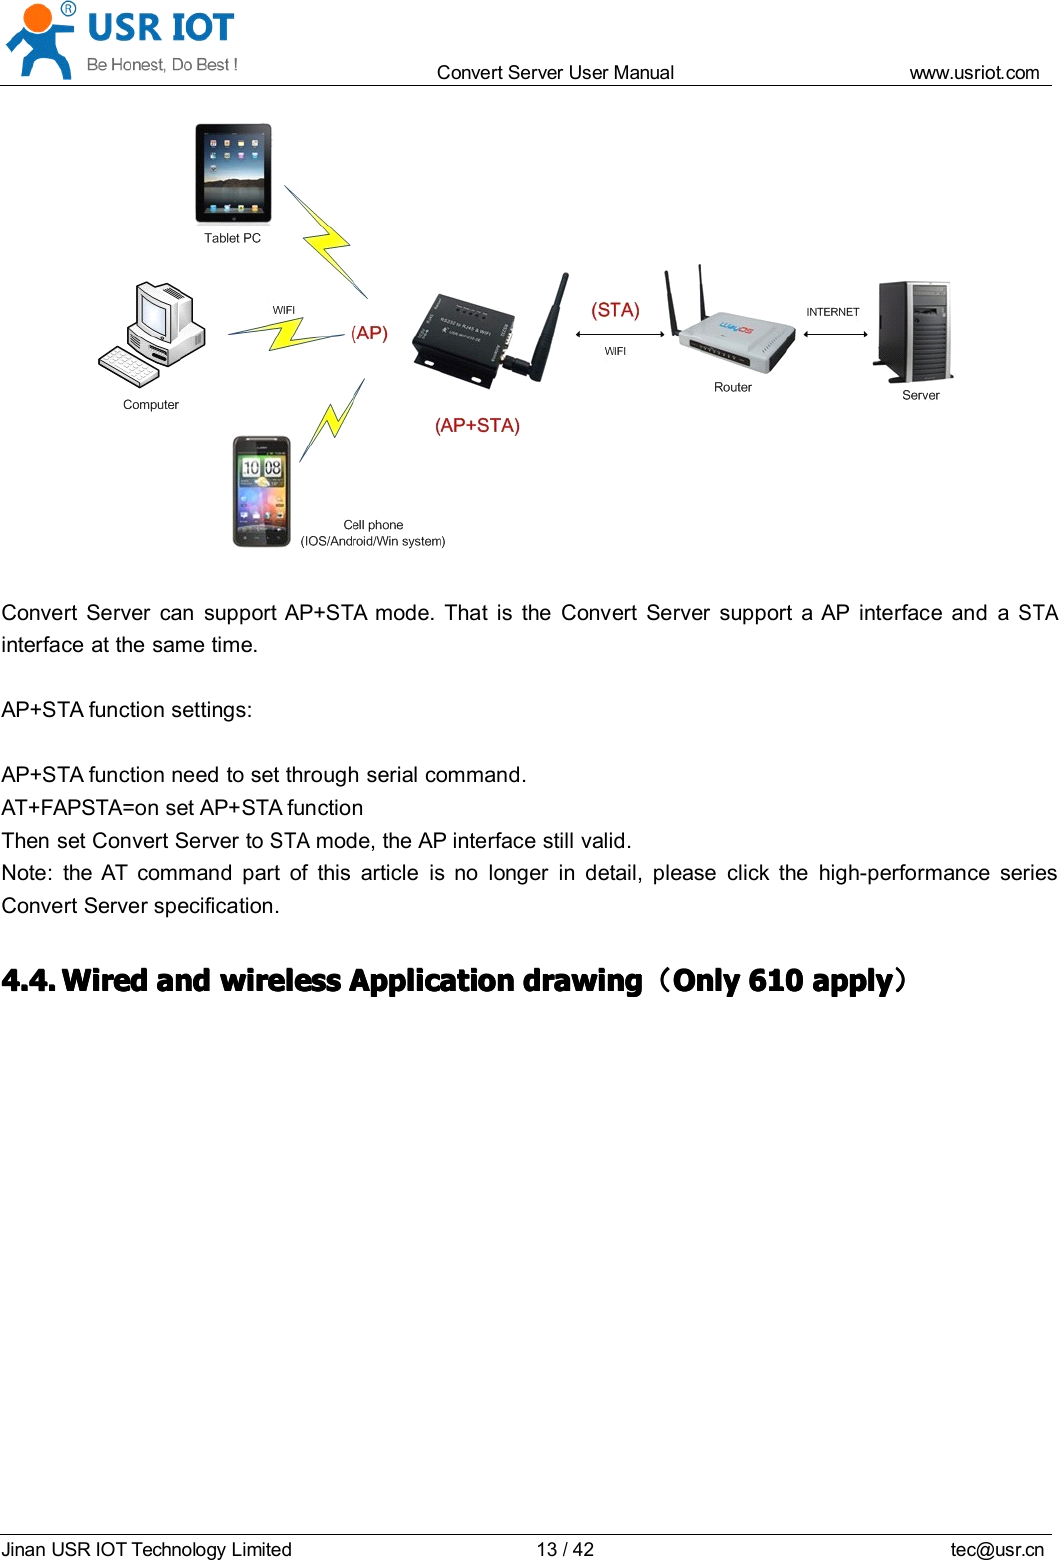 Convert Server User Manual www.usr iot.c omJinan USR IOT Technology Limited 13/42 tec@usr.cnConvert Server can support AP+STA mode. That is the Convert Server support a AP interface and aSTAinterface at the same time.AP+STA function settings:AP+STA function need to set through serial command.AT+FAPSTA=on set AP+STA functionThen set Convert Server toSTAmode, the AP interface still valid .Note: the AT command part of this article is no longer in detail, please click the high-performance seriesConvert Server specification.4.4.4.4.4.4.4.4. WiredWiredWiredWired andandandand wirelesswirelesswirelesswireless ApplicationApplicationApplicationApplication drawingdrawingdrawingdrawing （（（（OnlyOnlyOnlyOnly 610610610610 applyapplyapplyapply ））））